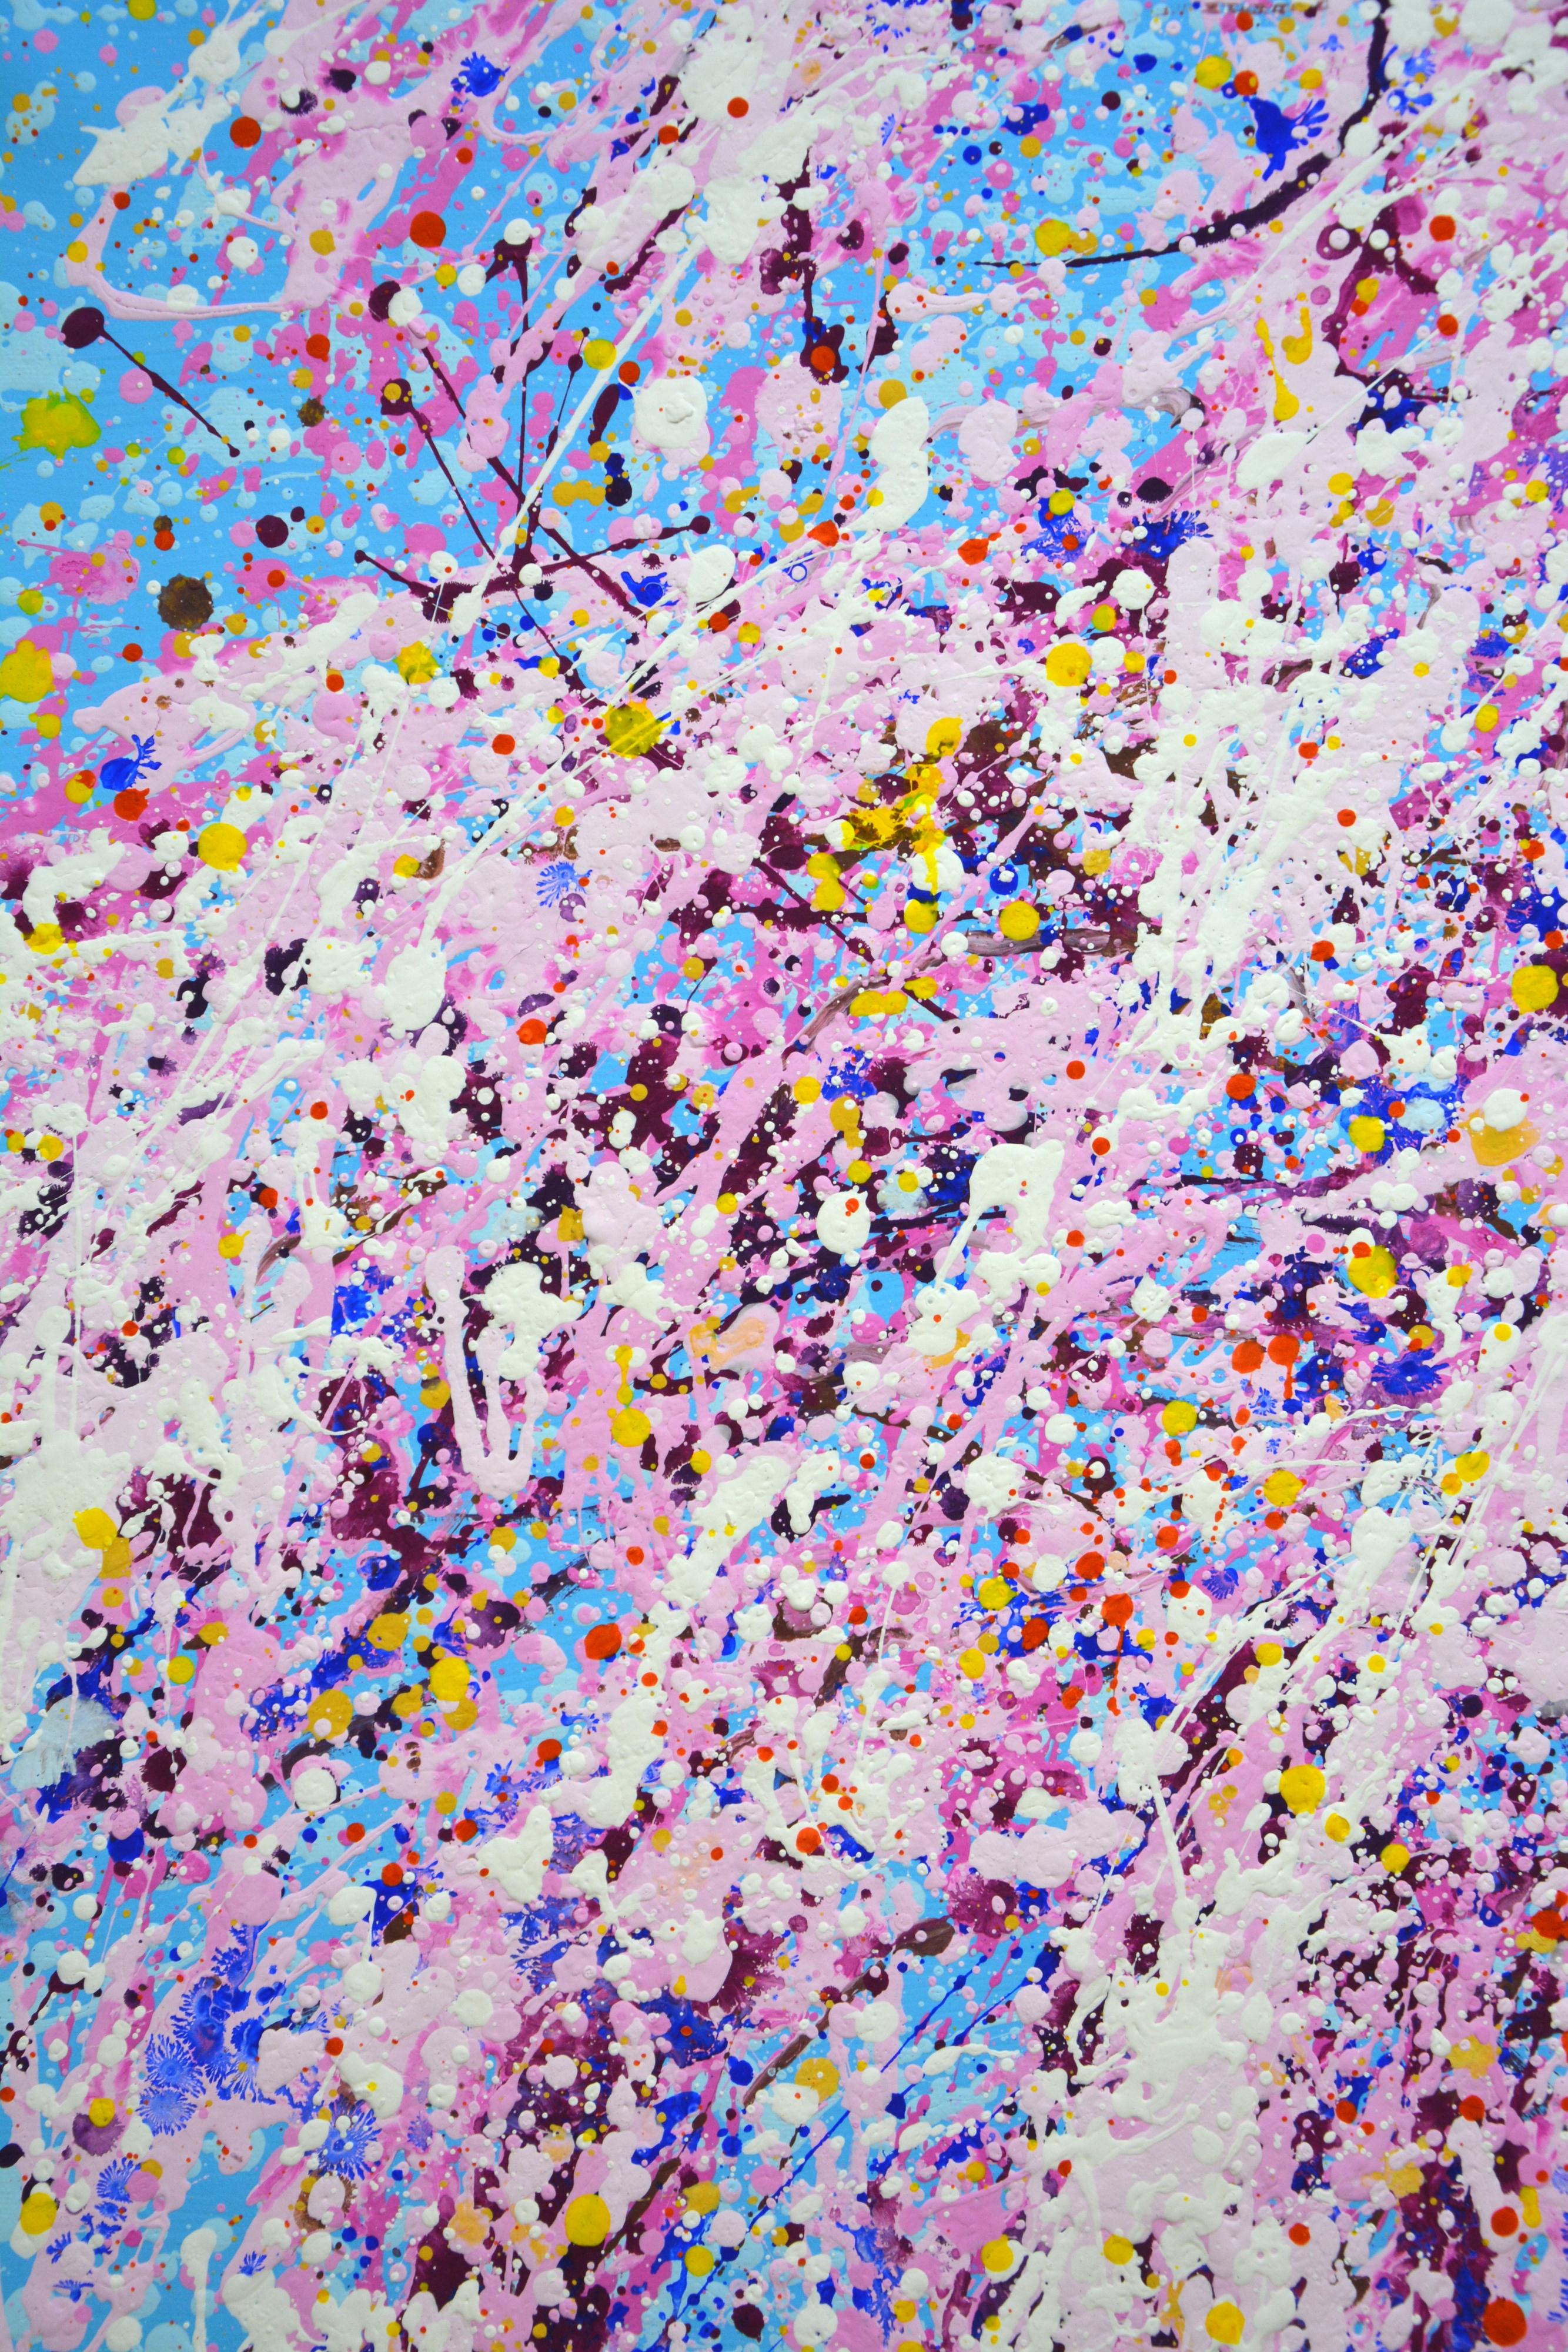 Blooming sakura 9 . Japanese tree. Acrylic paints in soft pink, baby blue, baby purple, lilac, white creamy pink splattered and splattered, creating a sense of shimmer, movement, and beautiful life. Colors create an atmosphere of relaxation, harmony